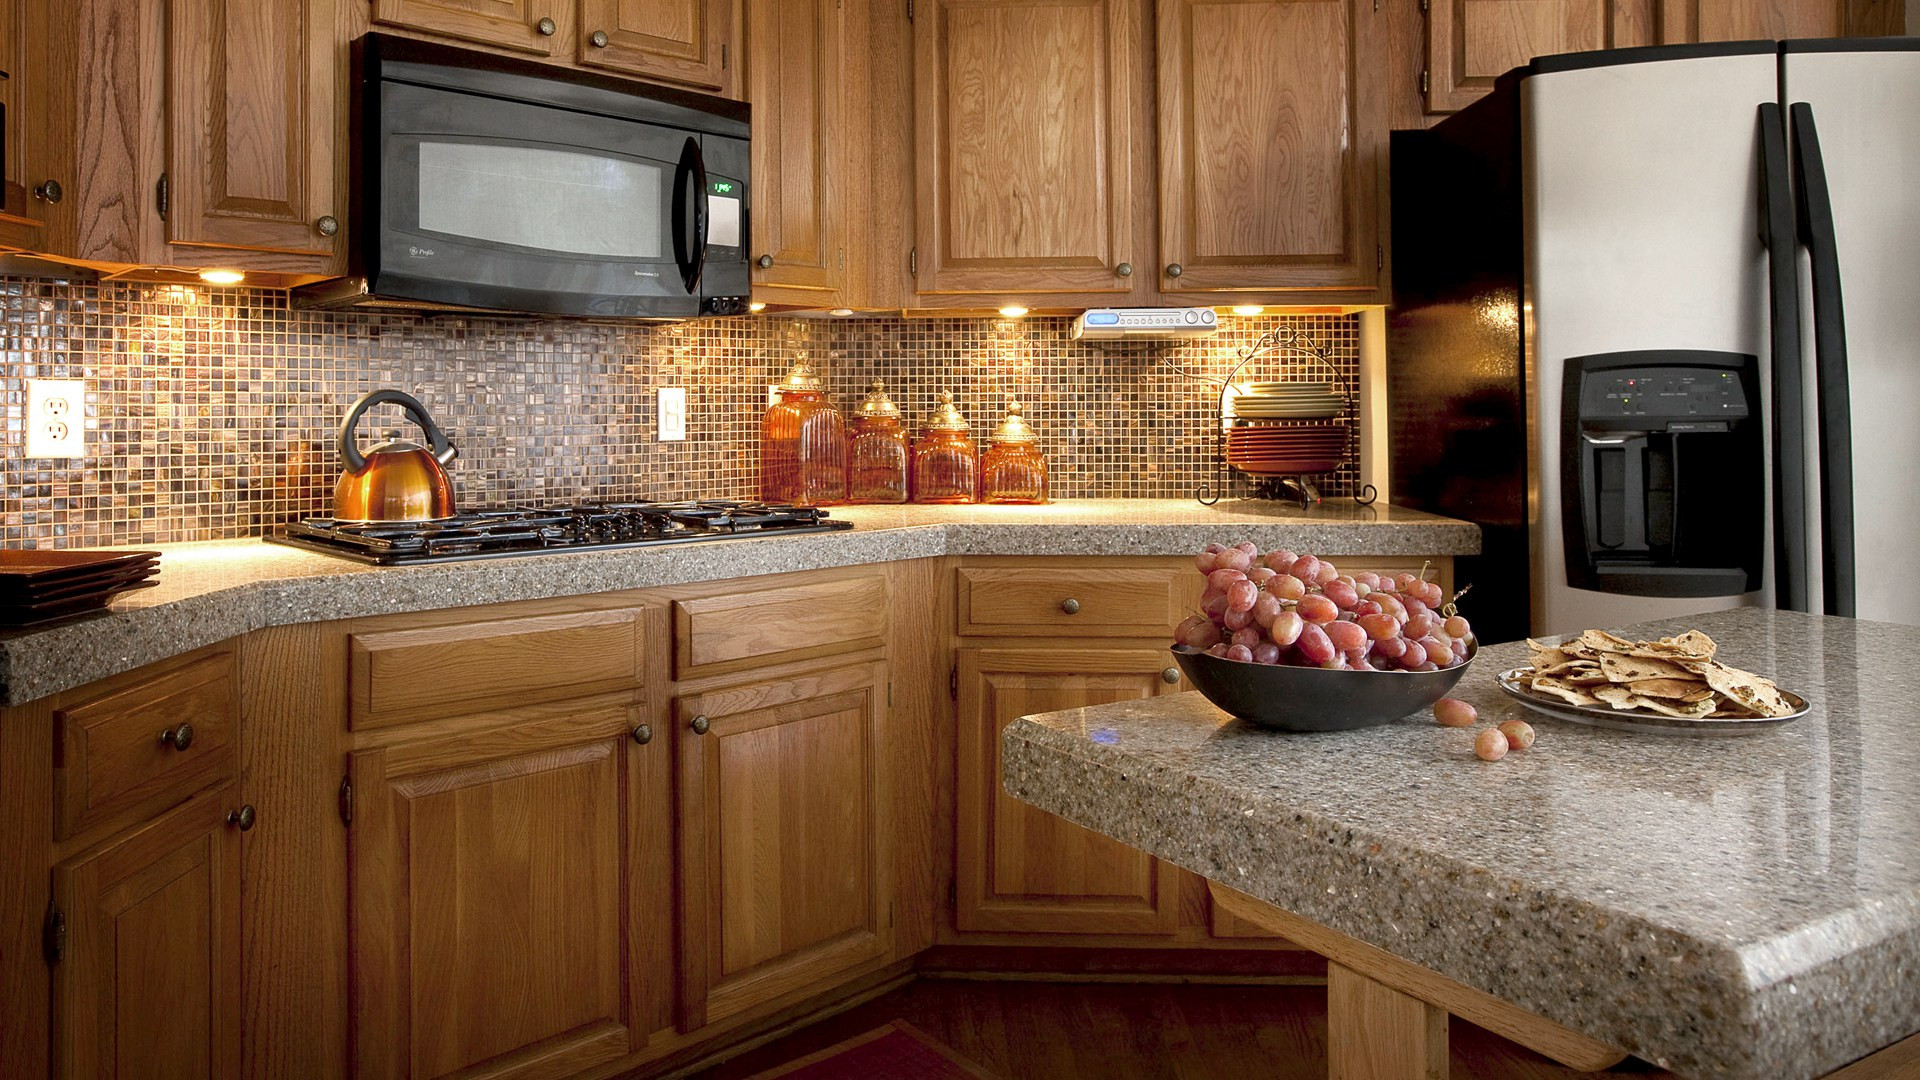 Kitchen Countertops Tile Ideas
 50 Best Kitchen Countertops Options You Should See